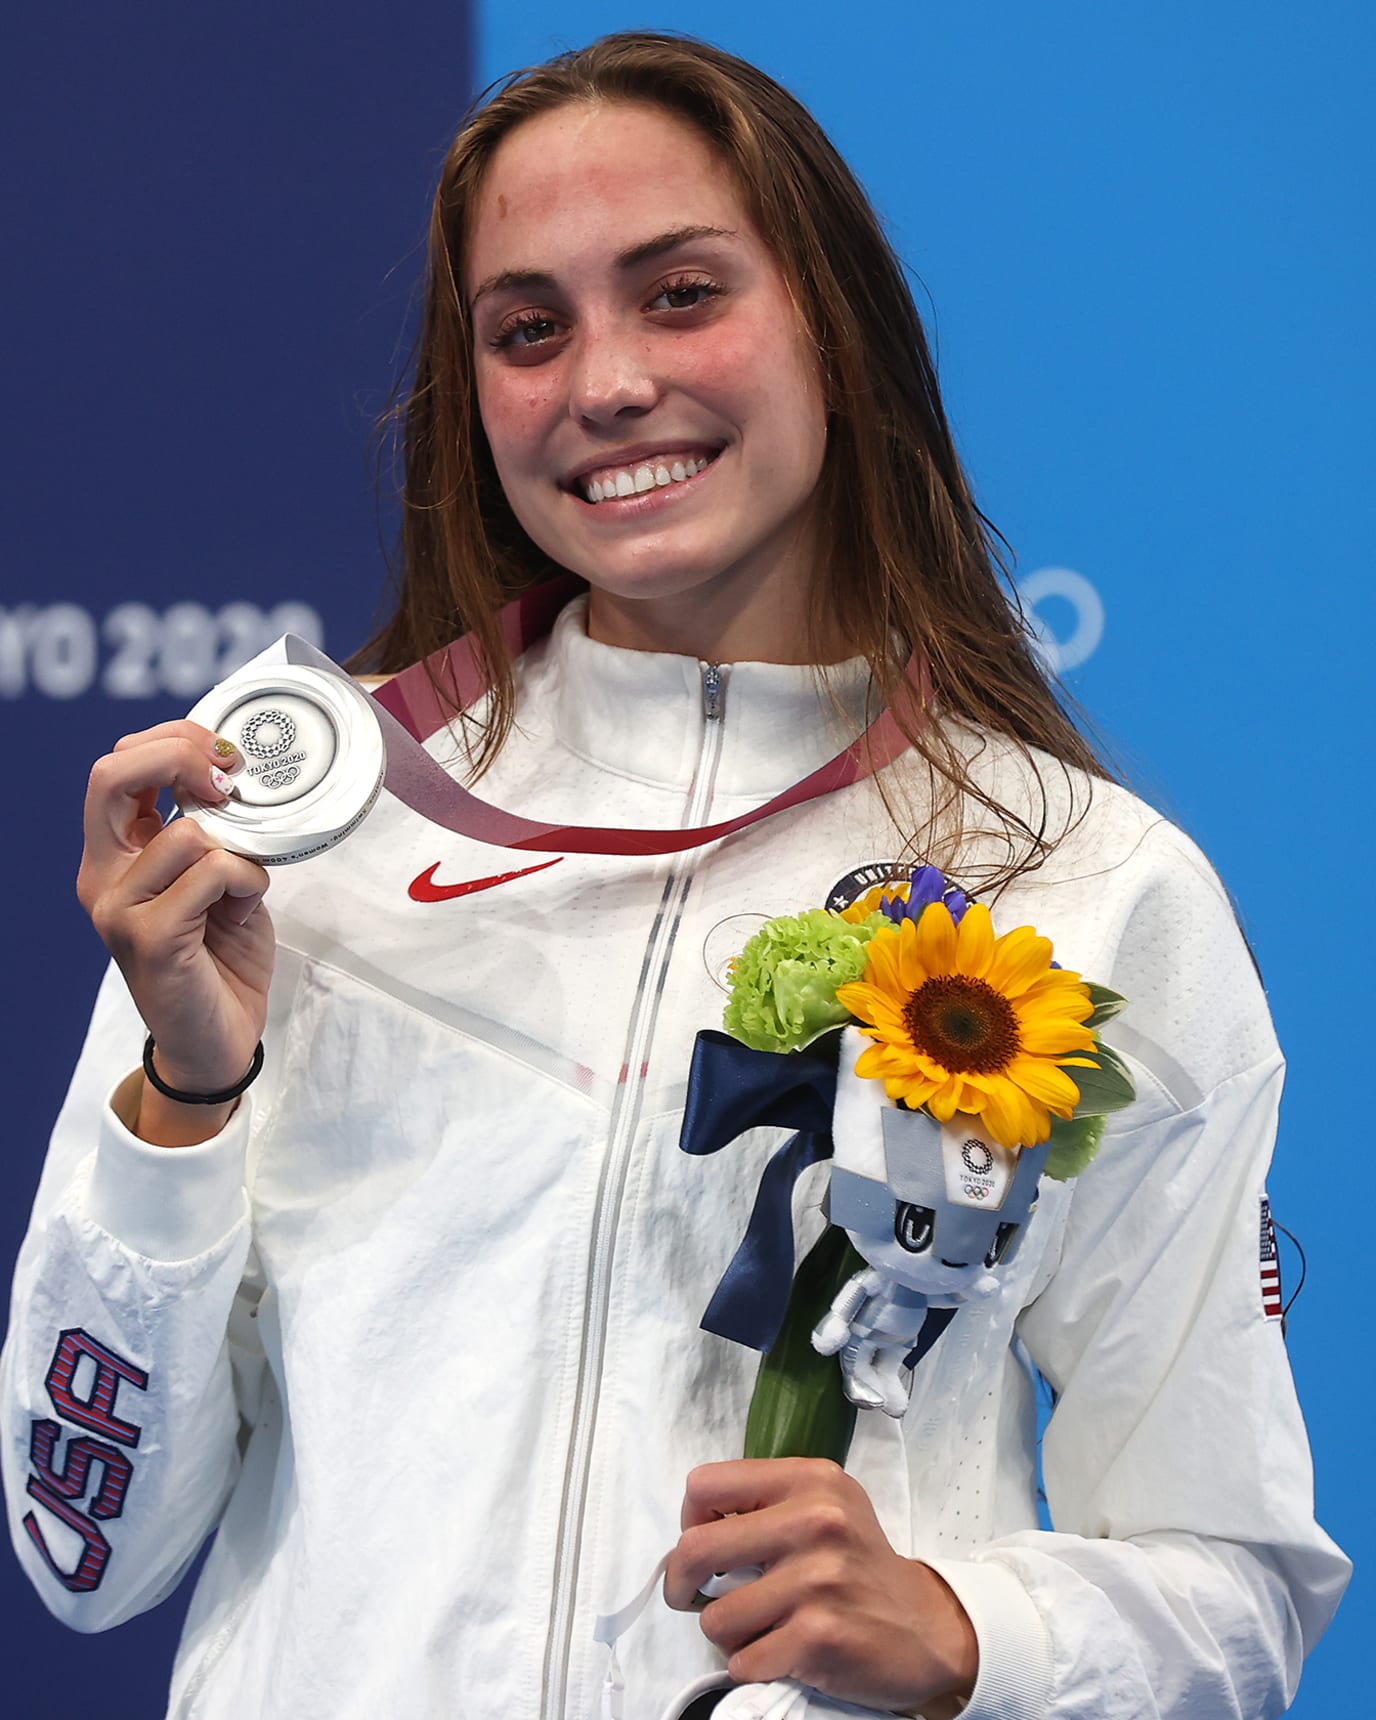 Emma Weyant smiles and proudly holds her silver medal